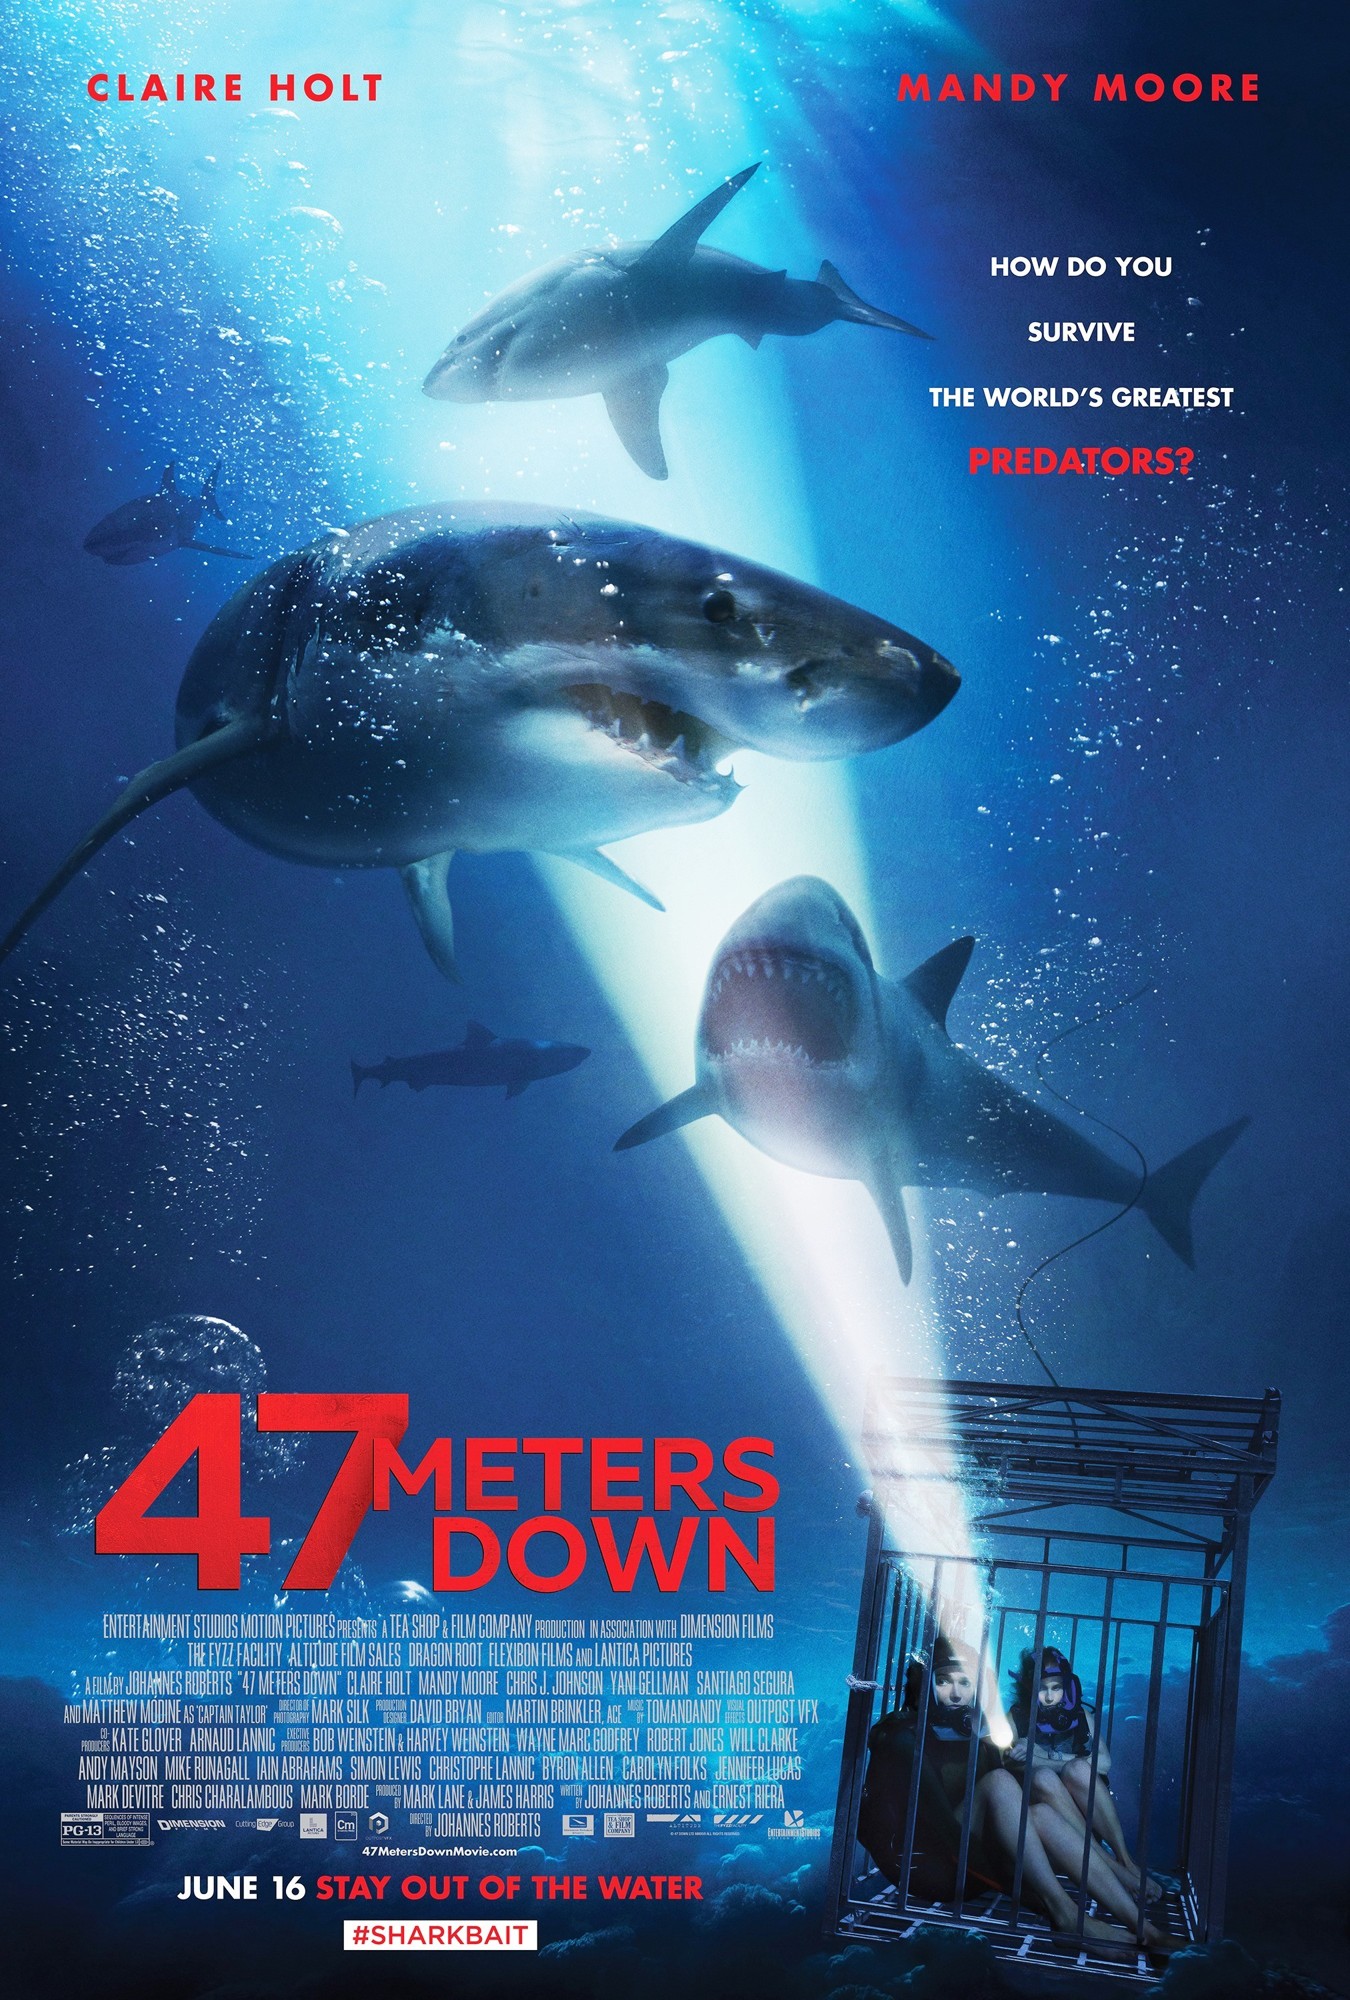 47 Meters Down Picture 4